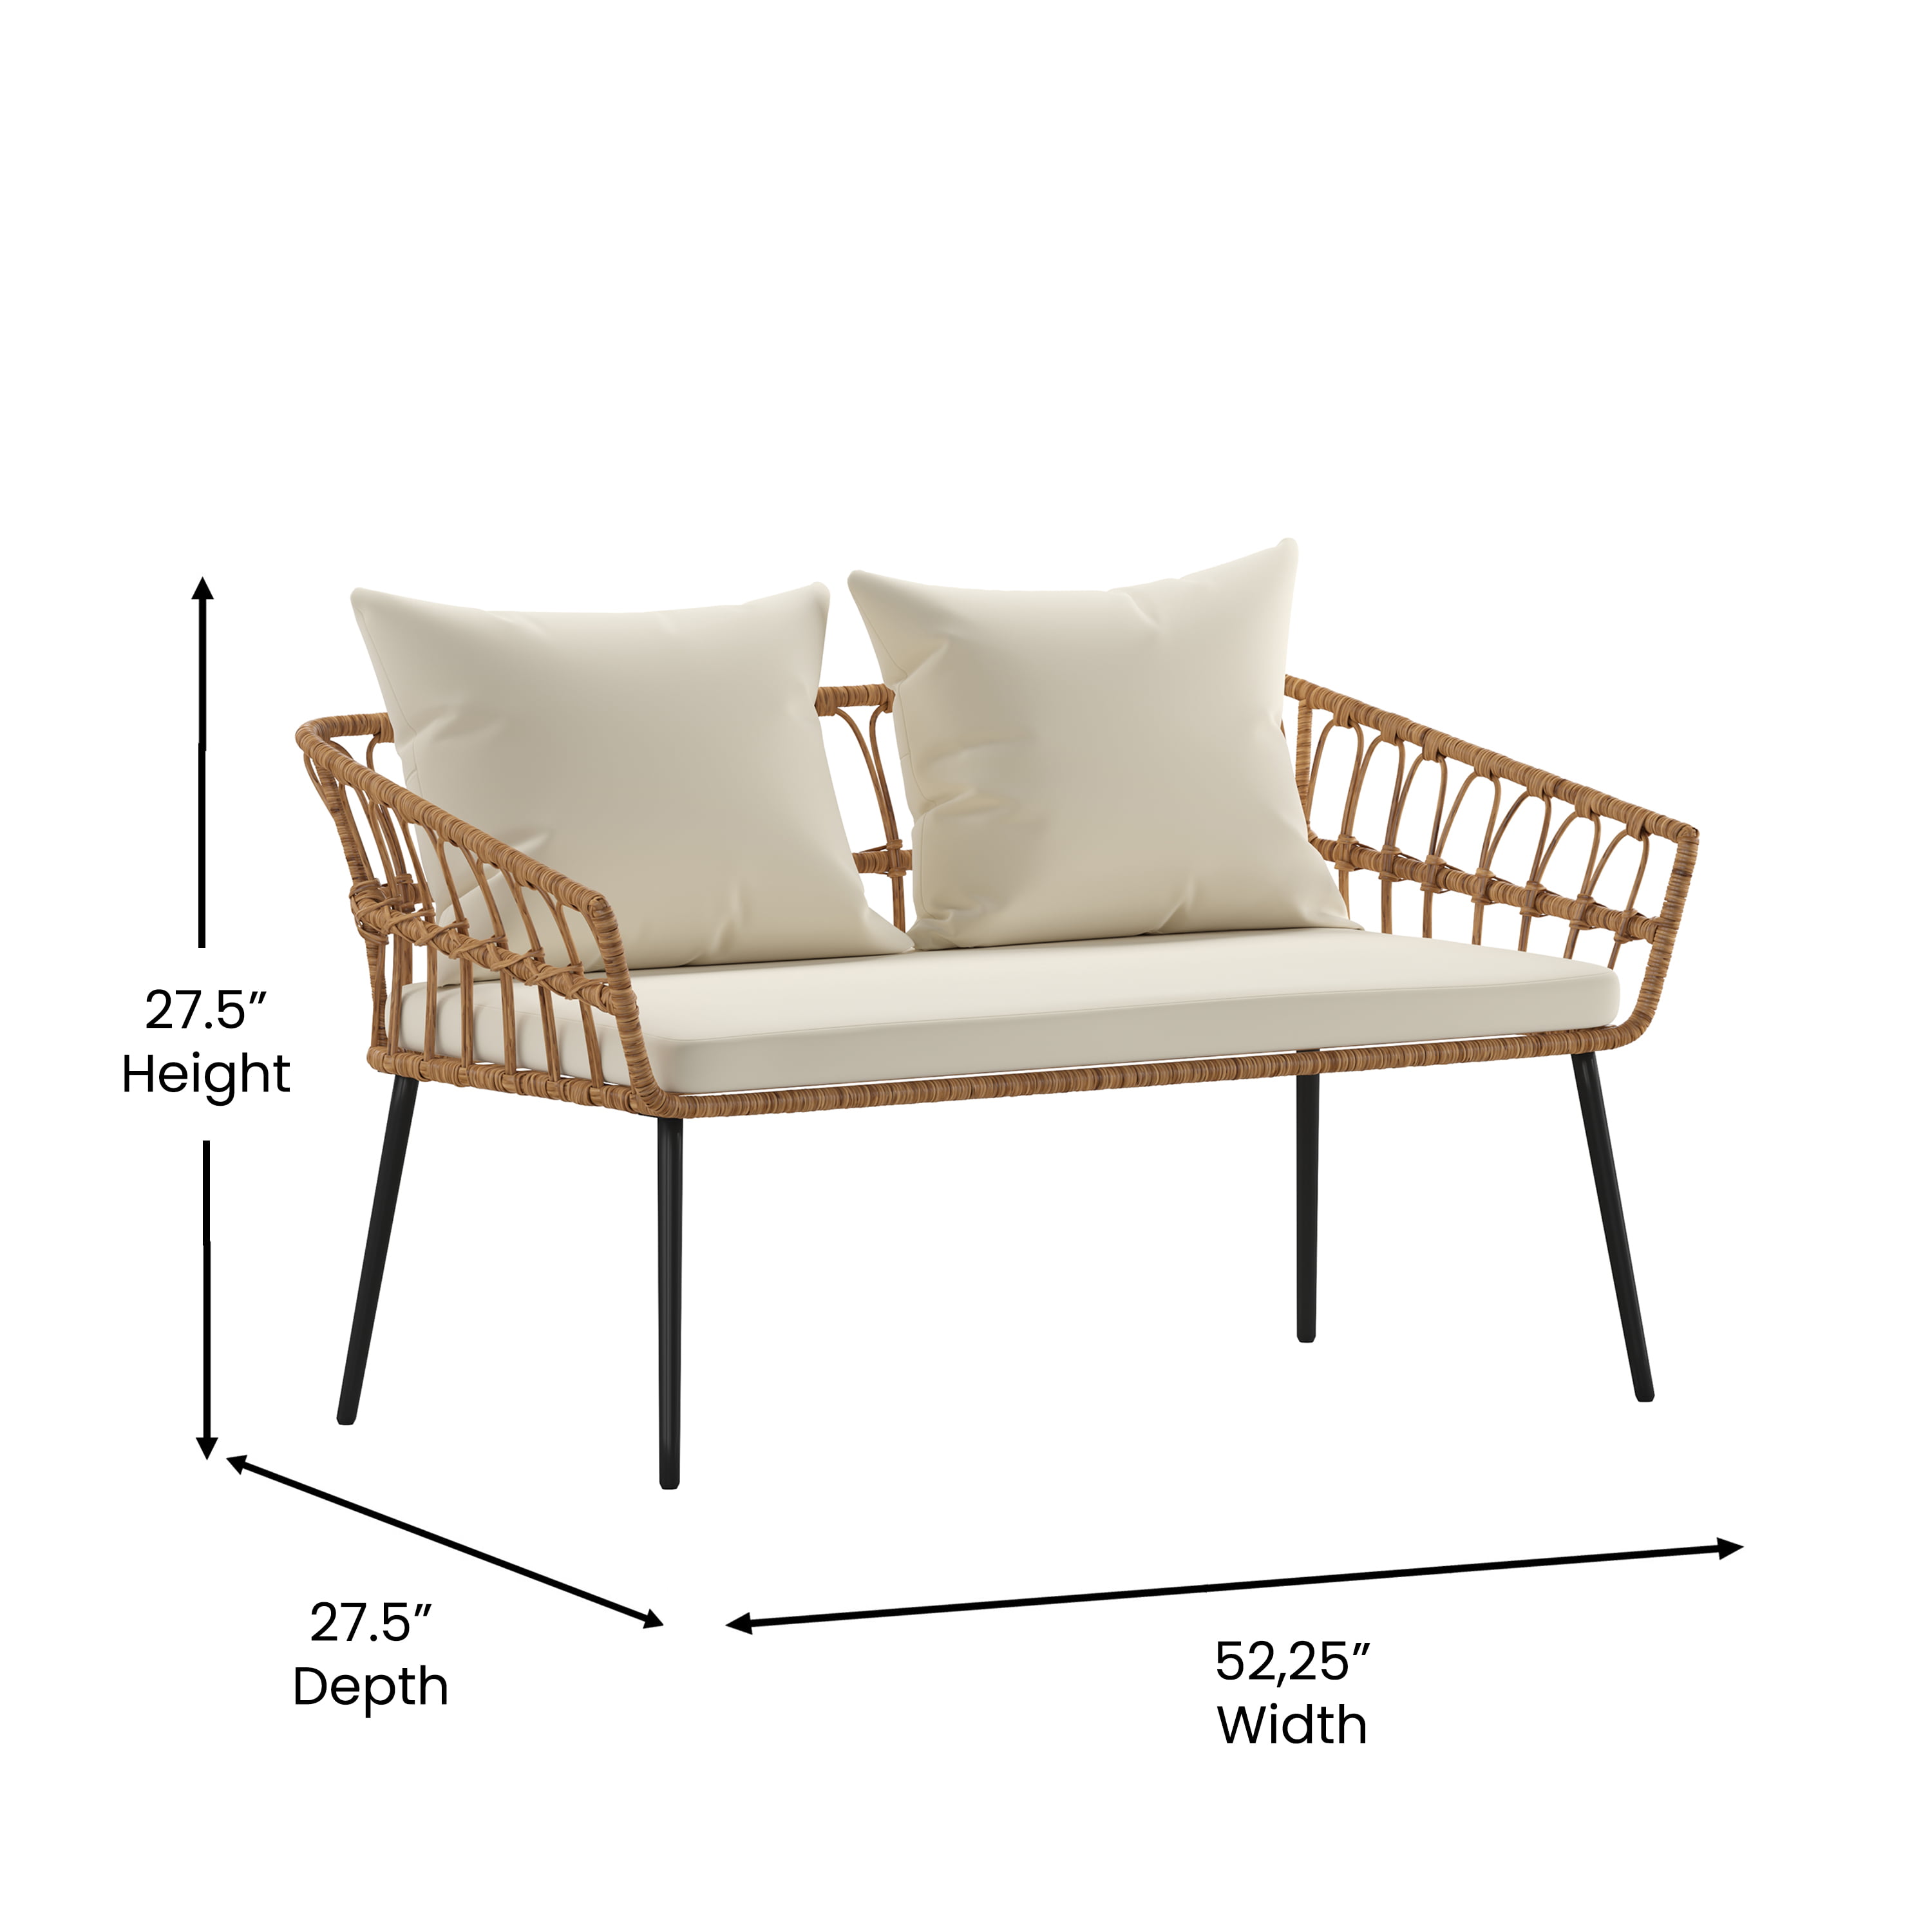 Emma + Oliver Four Piece Indoor/Outdoor Boho Open Weave Natural Rattan Rope  Patio Set with Two Chairs, Loveseat and Table with Cream Cushions